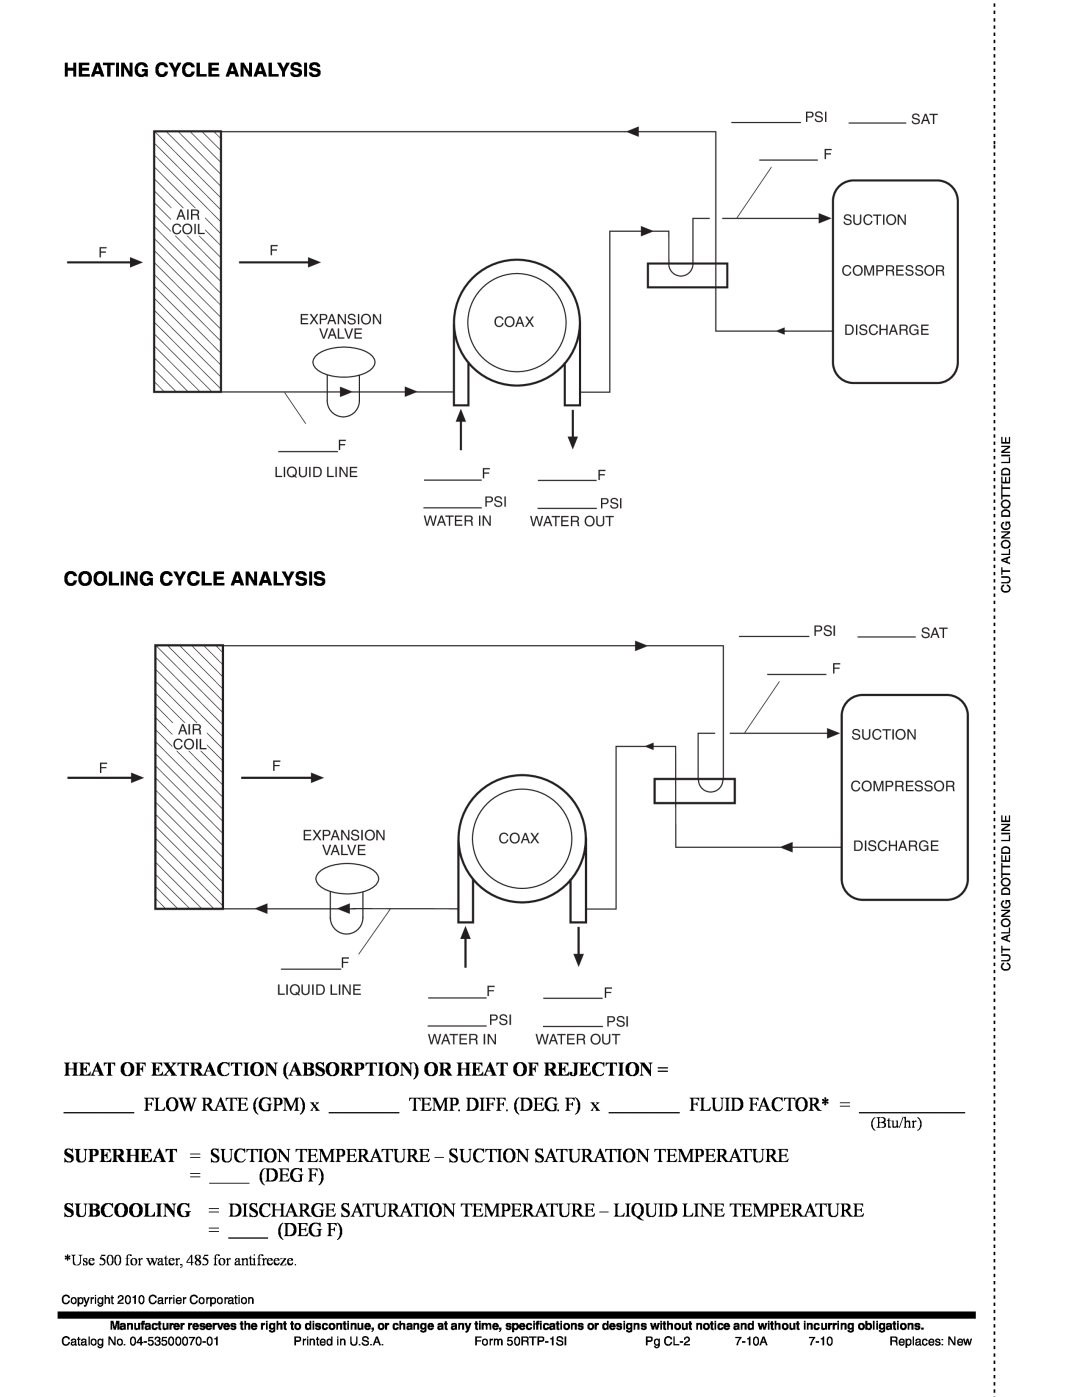 Carrier 50RTP03-20 Heating Cycle Analysis, Cooling Cycle Analysis, Flow Rate Gpm, Fluid Factor* =, =Deg F 